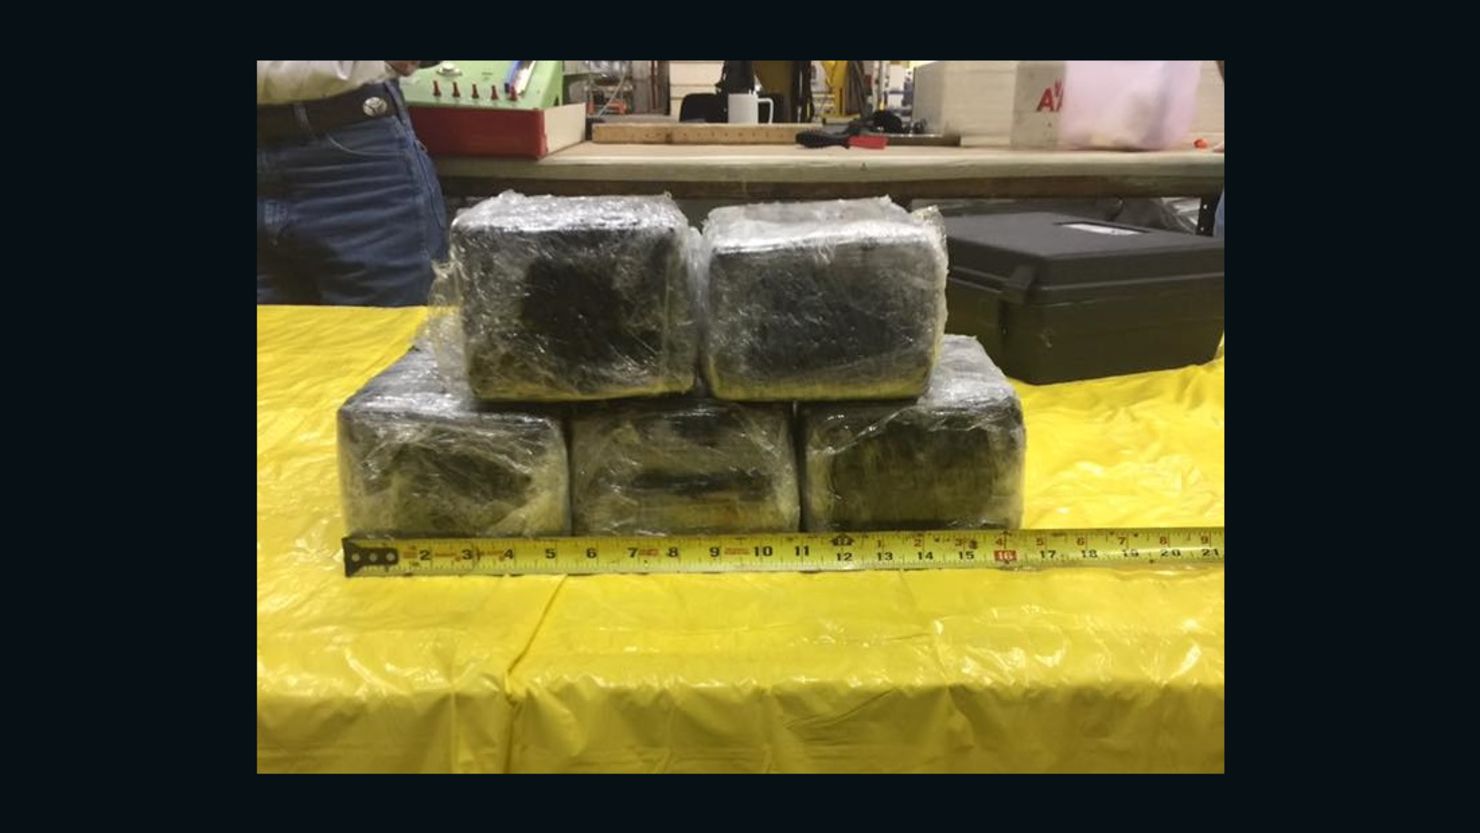 Cocaine worth an estimated $200,000 was discovered in the nose of an American Airlines plane that flew from Colombia to Oklahoma, Tulsa County Sheriff's Office said.